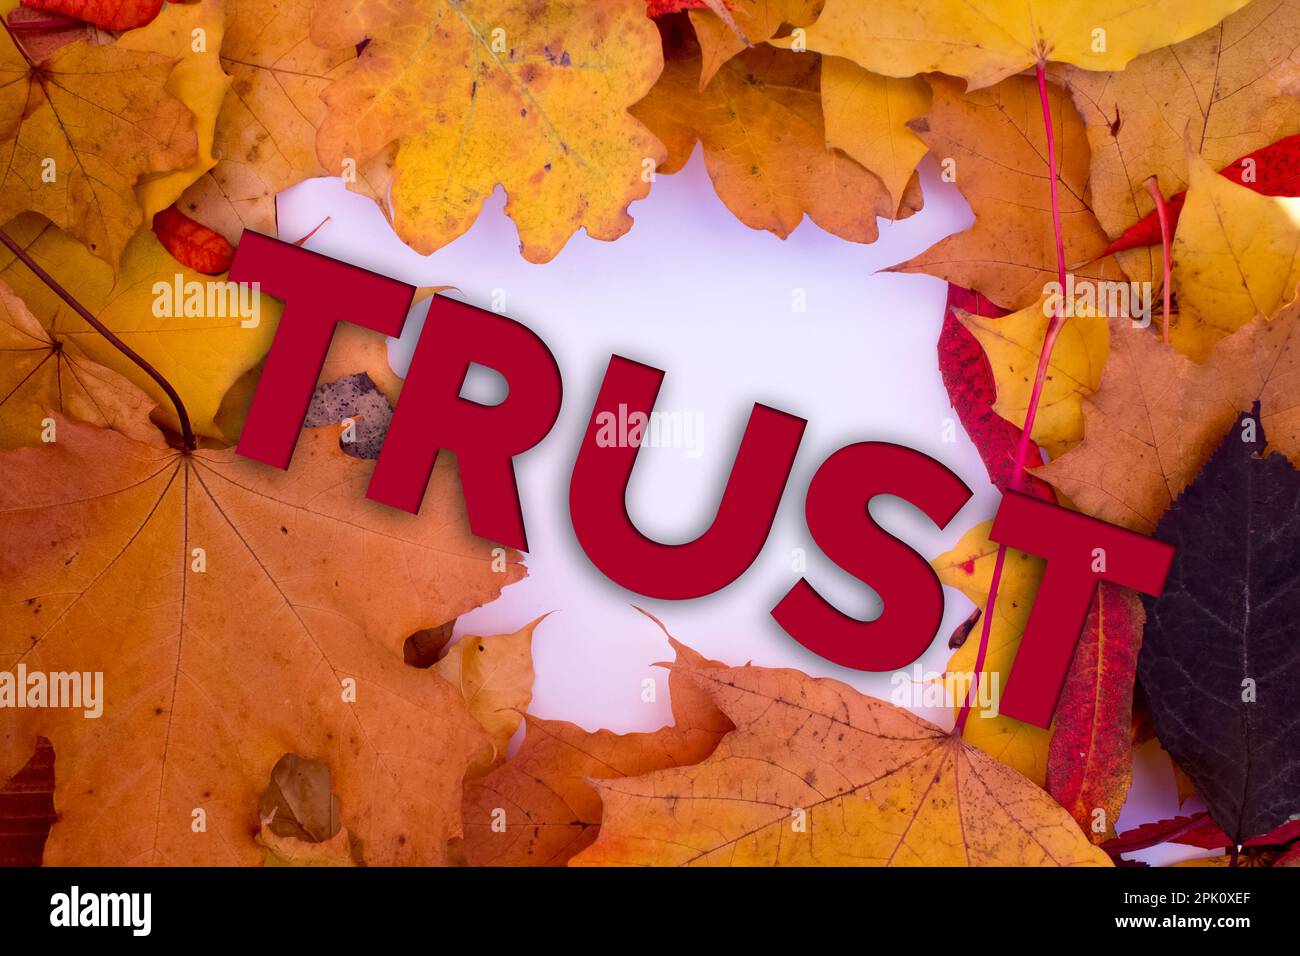 Autumn leaves, objects with Trust text. Natural patterns, color design. Stock Photo